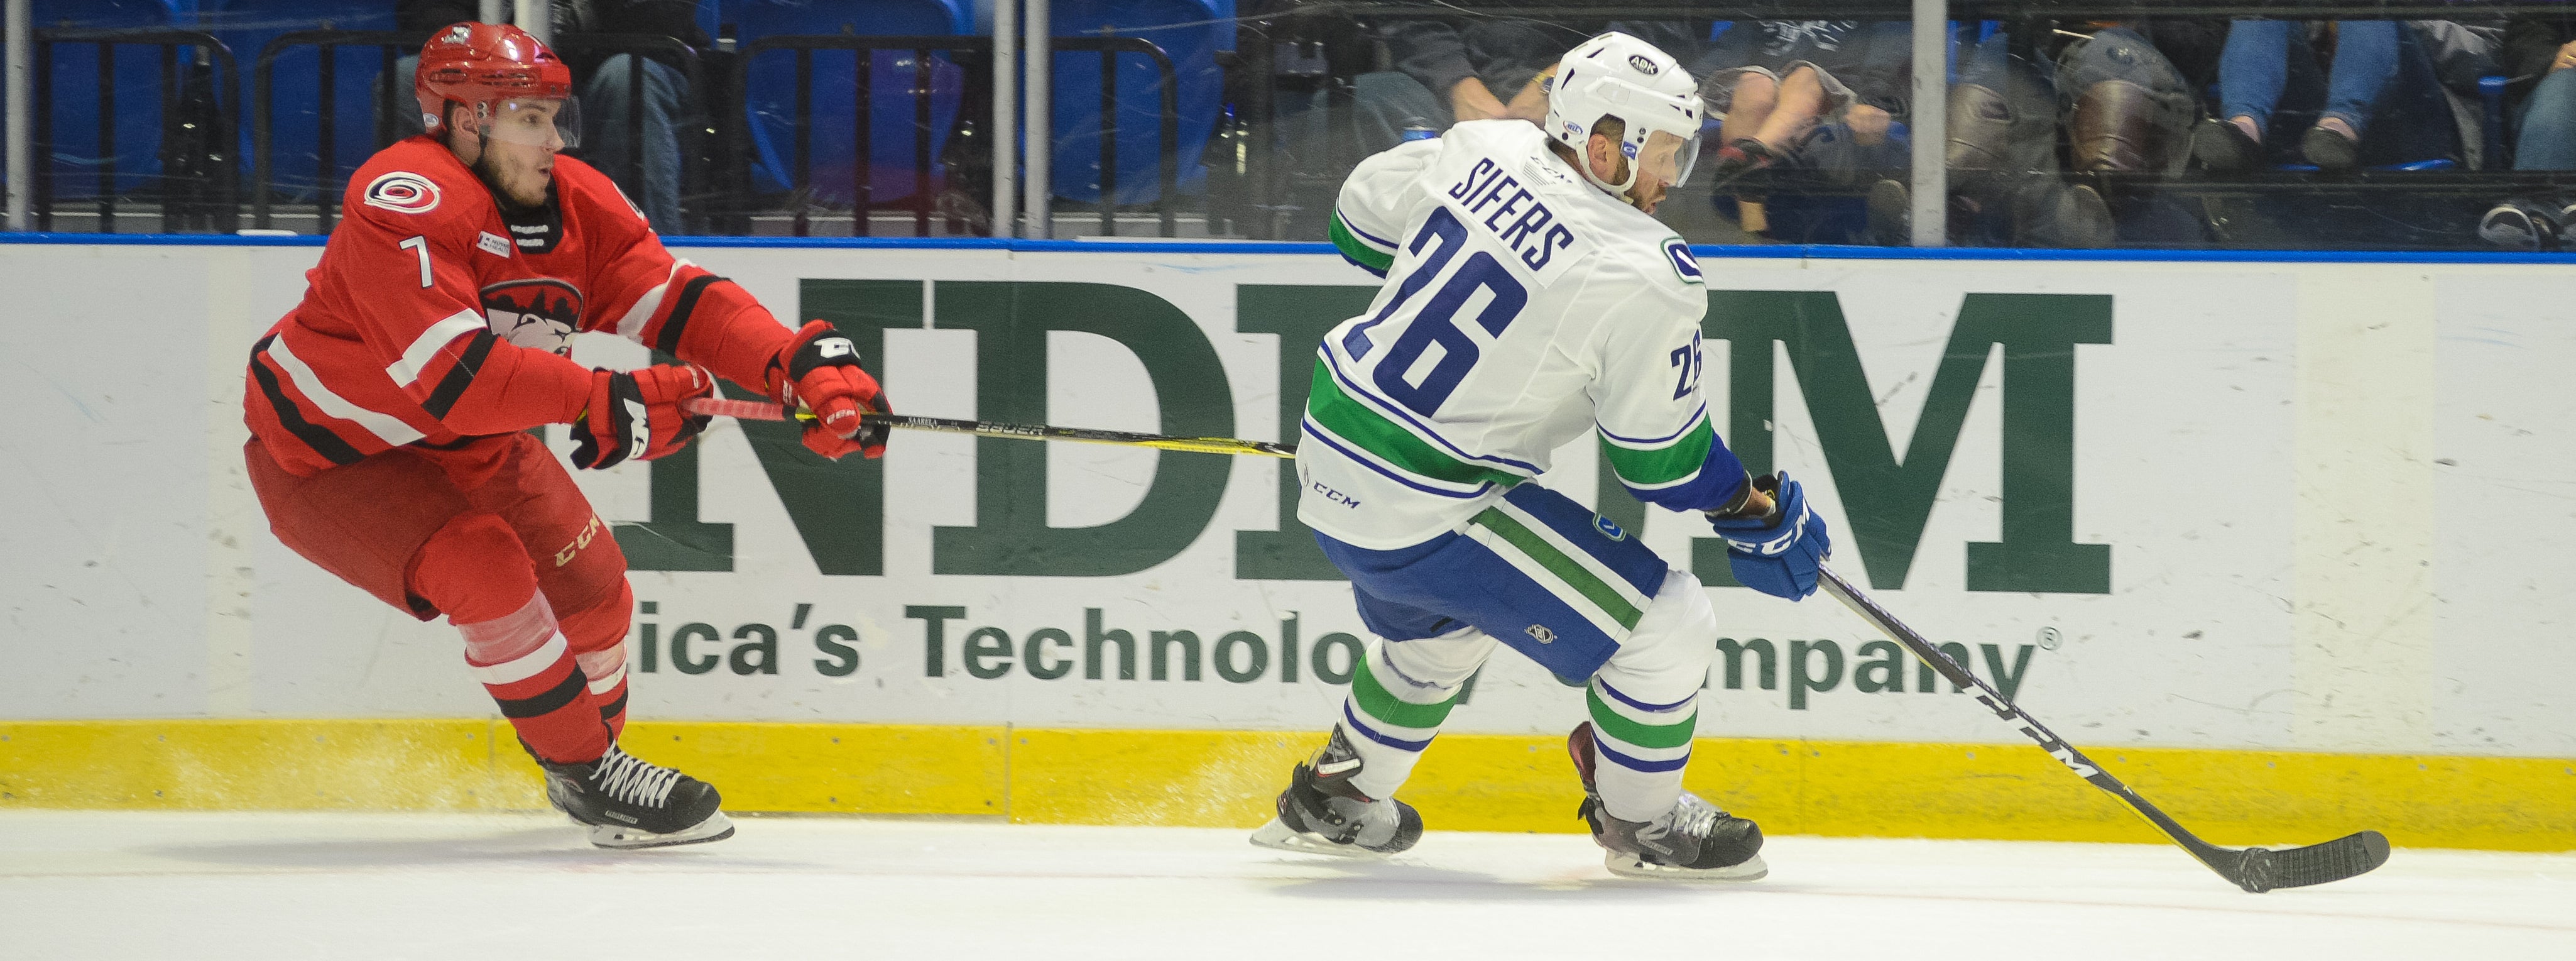 COMETS TAKE ON CHECKERS IN SUNDAY MATINEE